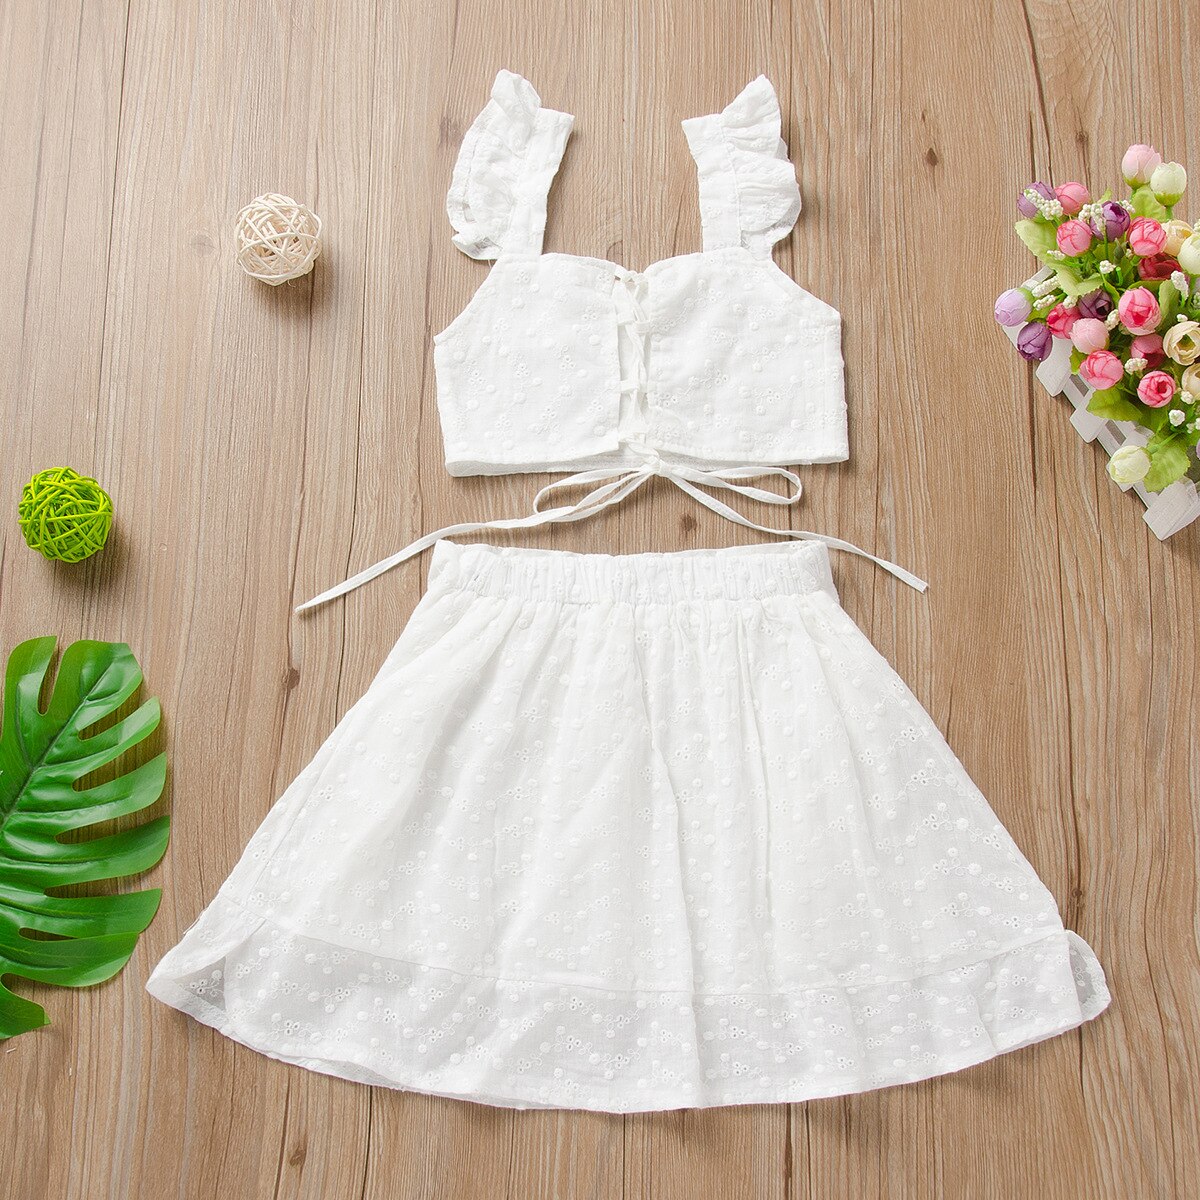 Cute-Kids-Girls-Two-Piece-Clothing-Set-Summer-Floral-Lace-Camisole-Button-A-Line-Skirt-2pcs-1